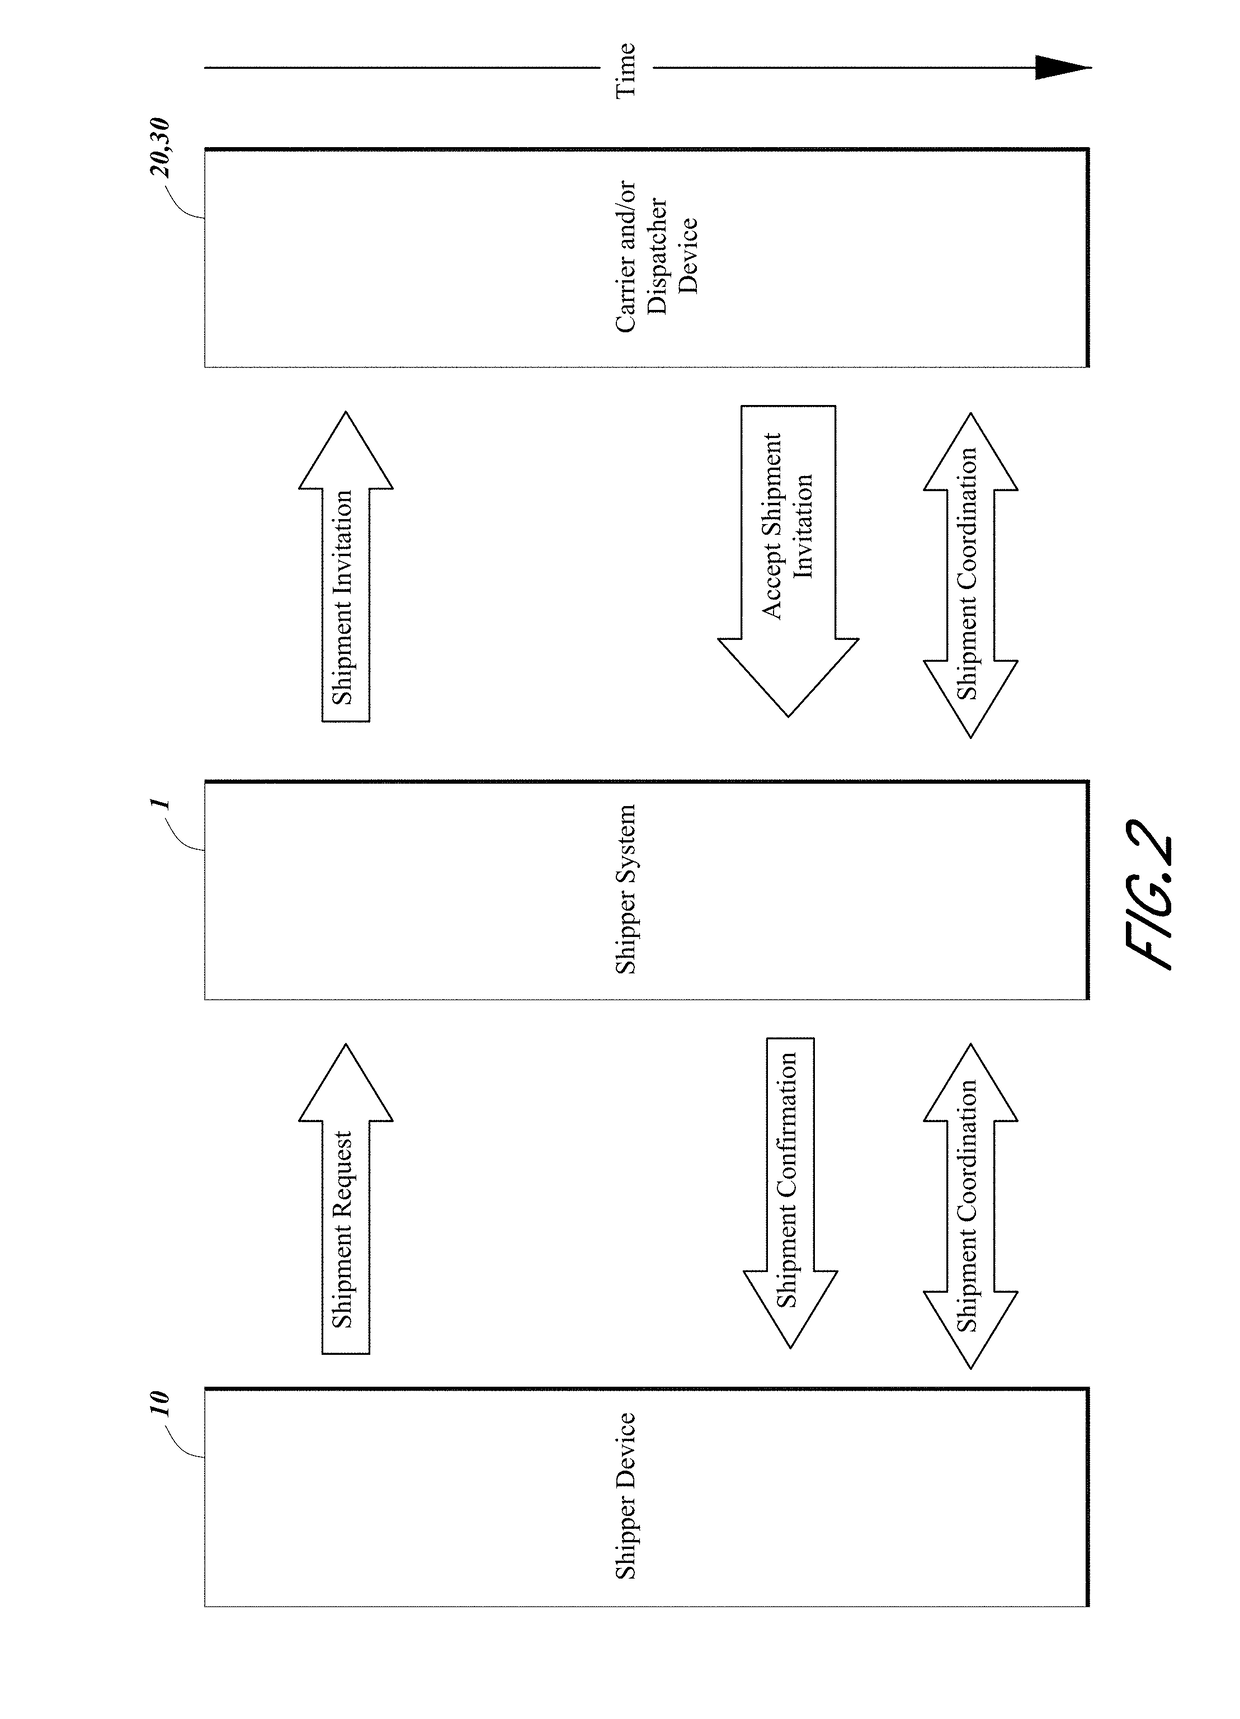 Systems for routing and controlling vehicles for freight